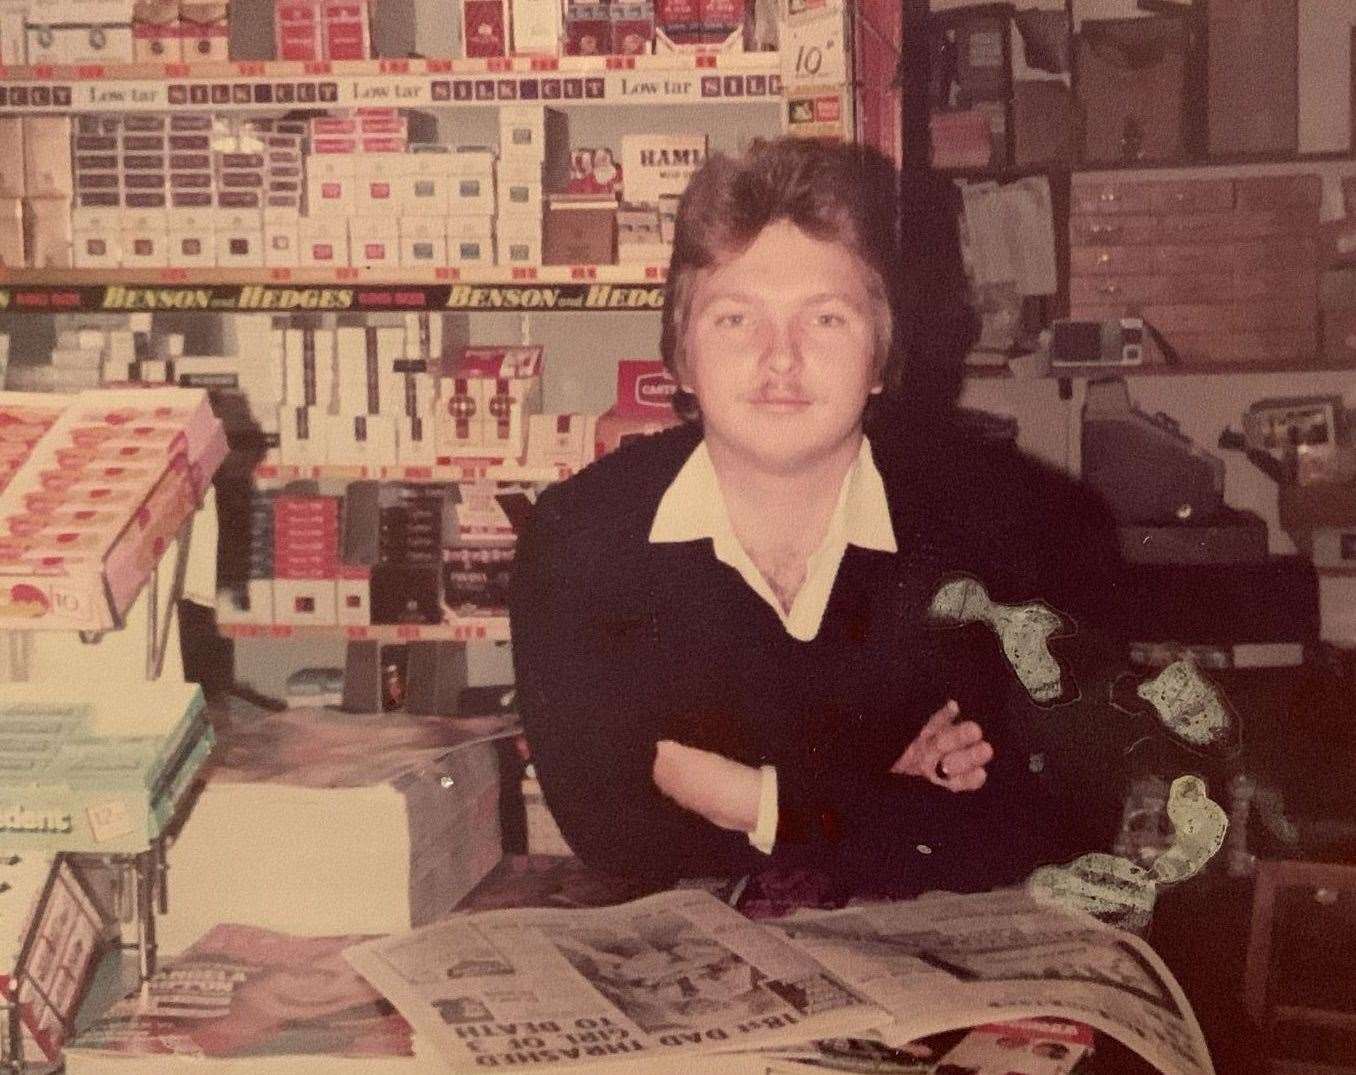 Richard Manuel started working at the shop as a paperboy aged 11 before buying it in 1985